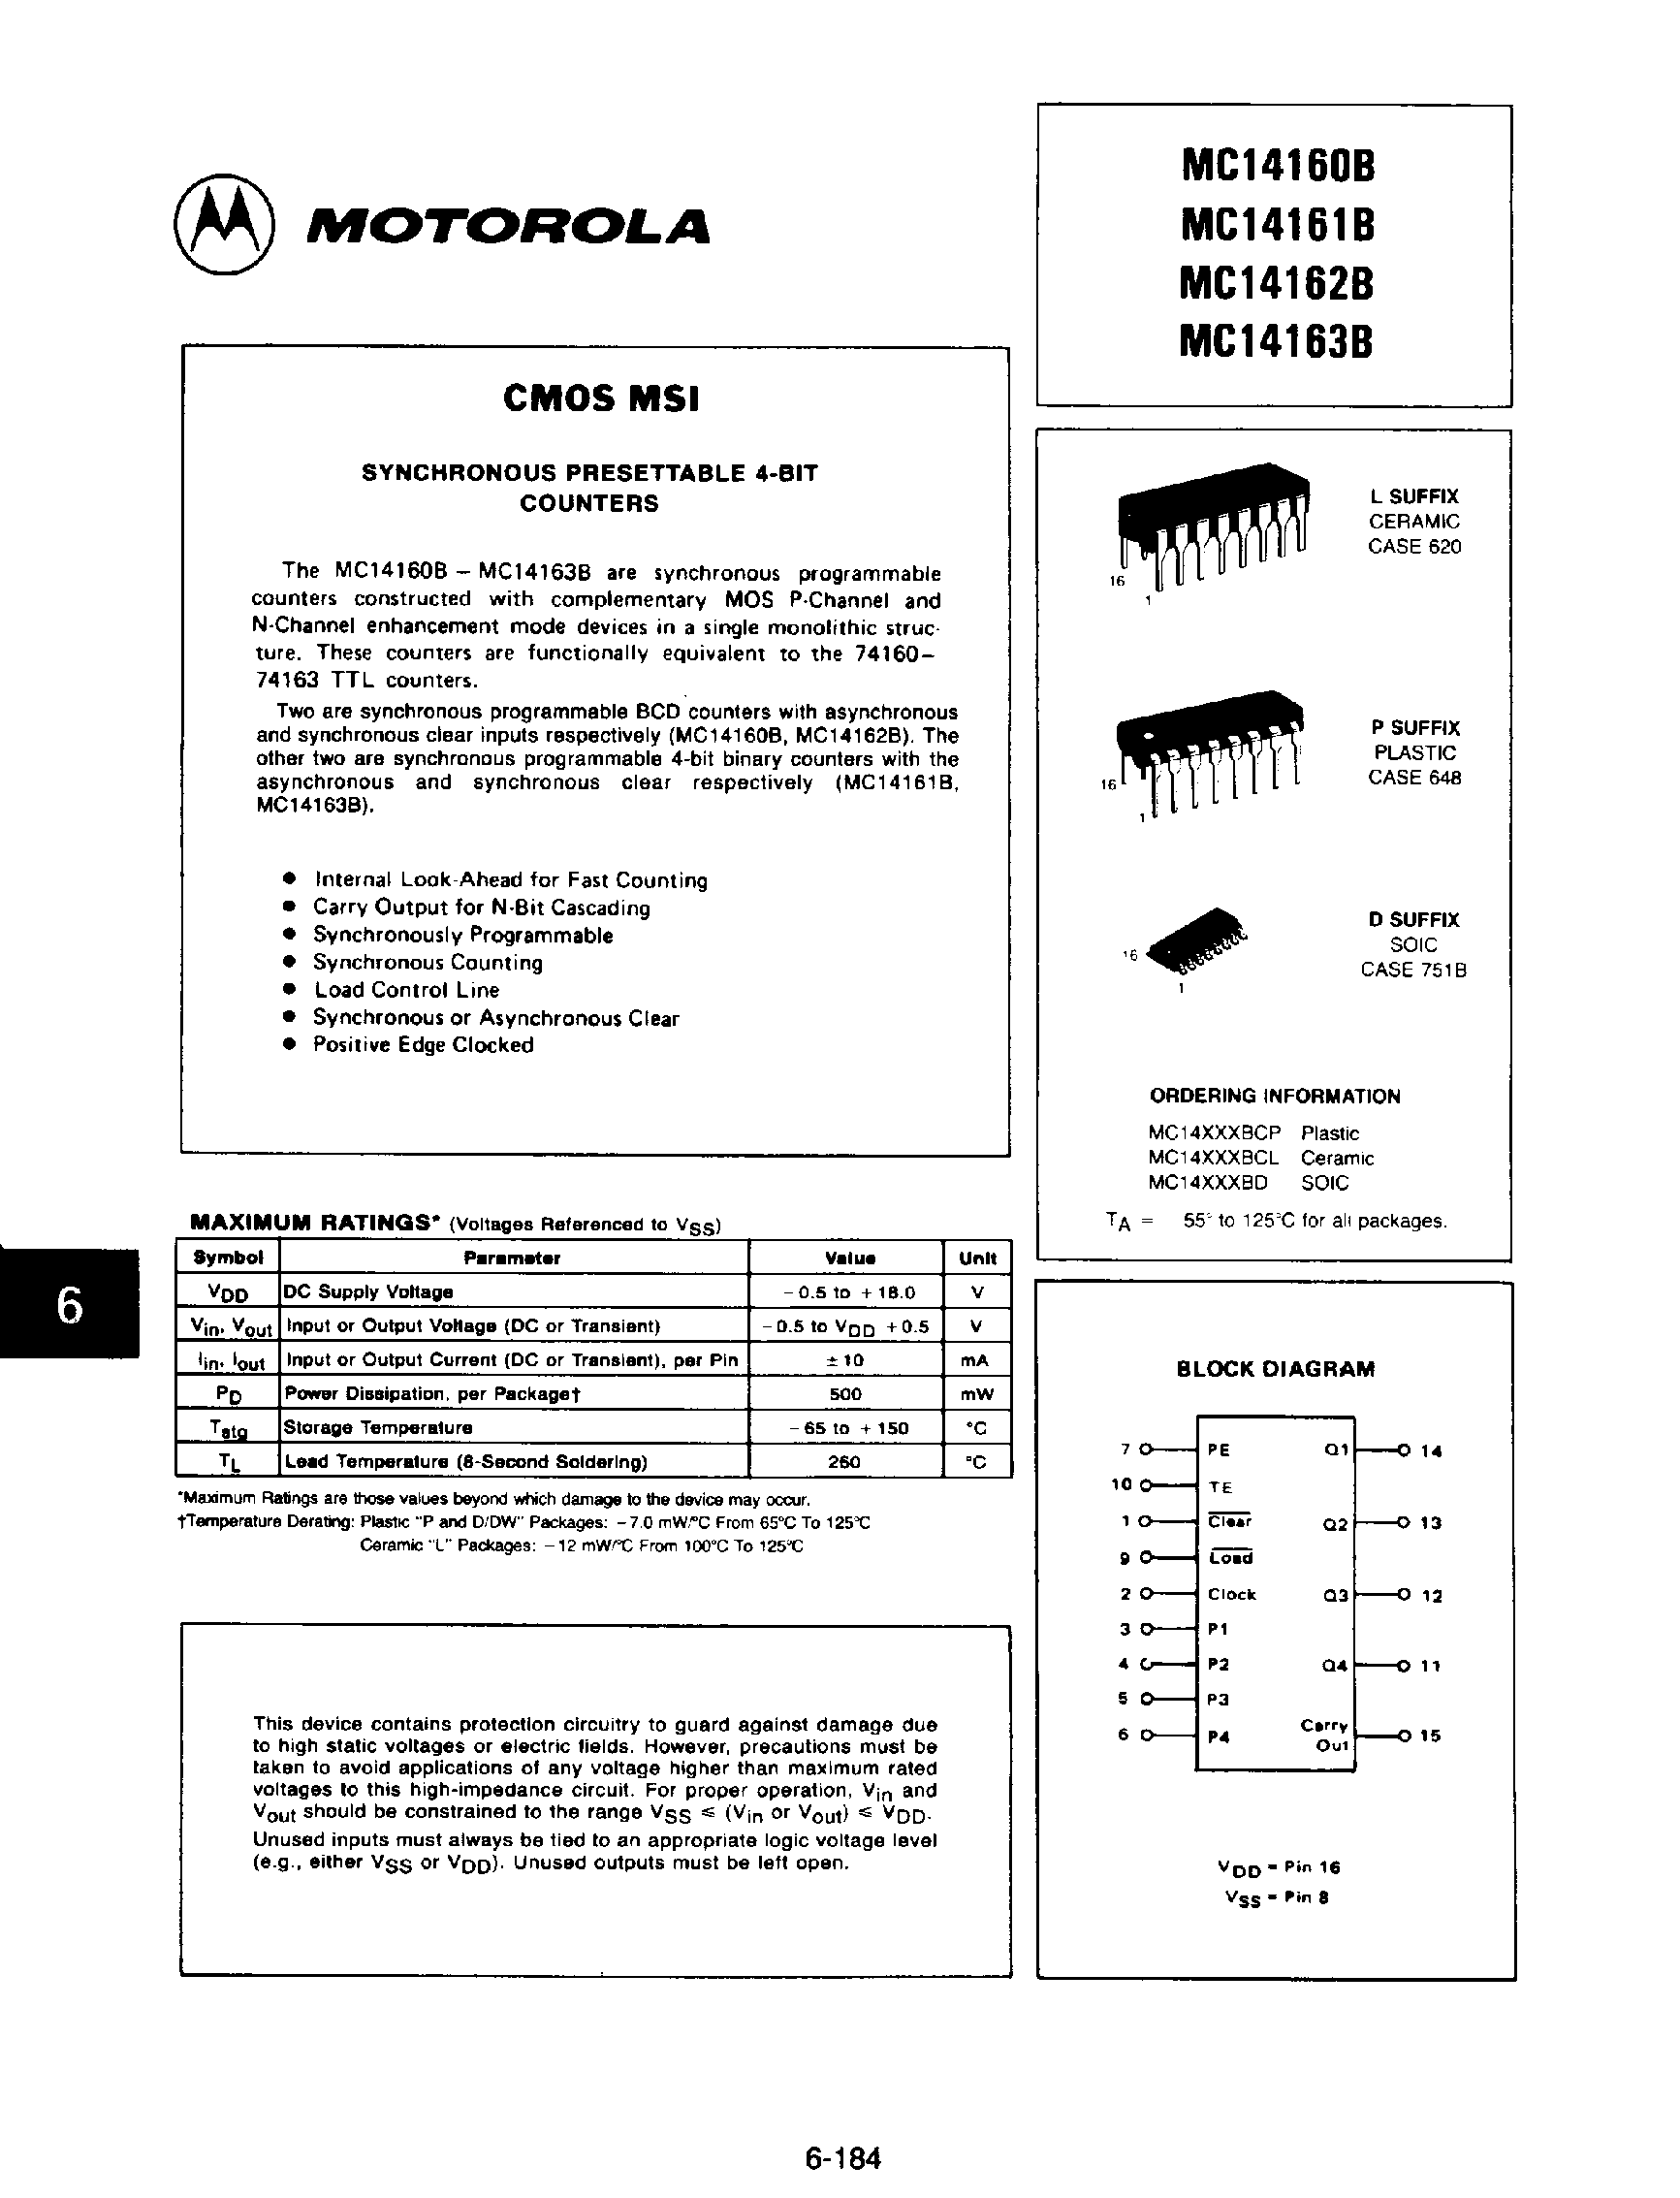 Datasheet MC14160B - Synchronous Presettable 4-Bit Counters page 1